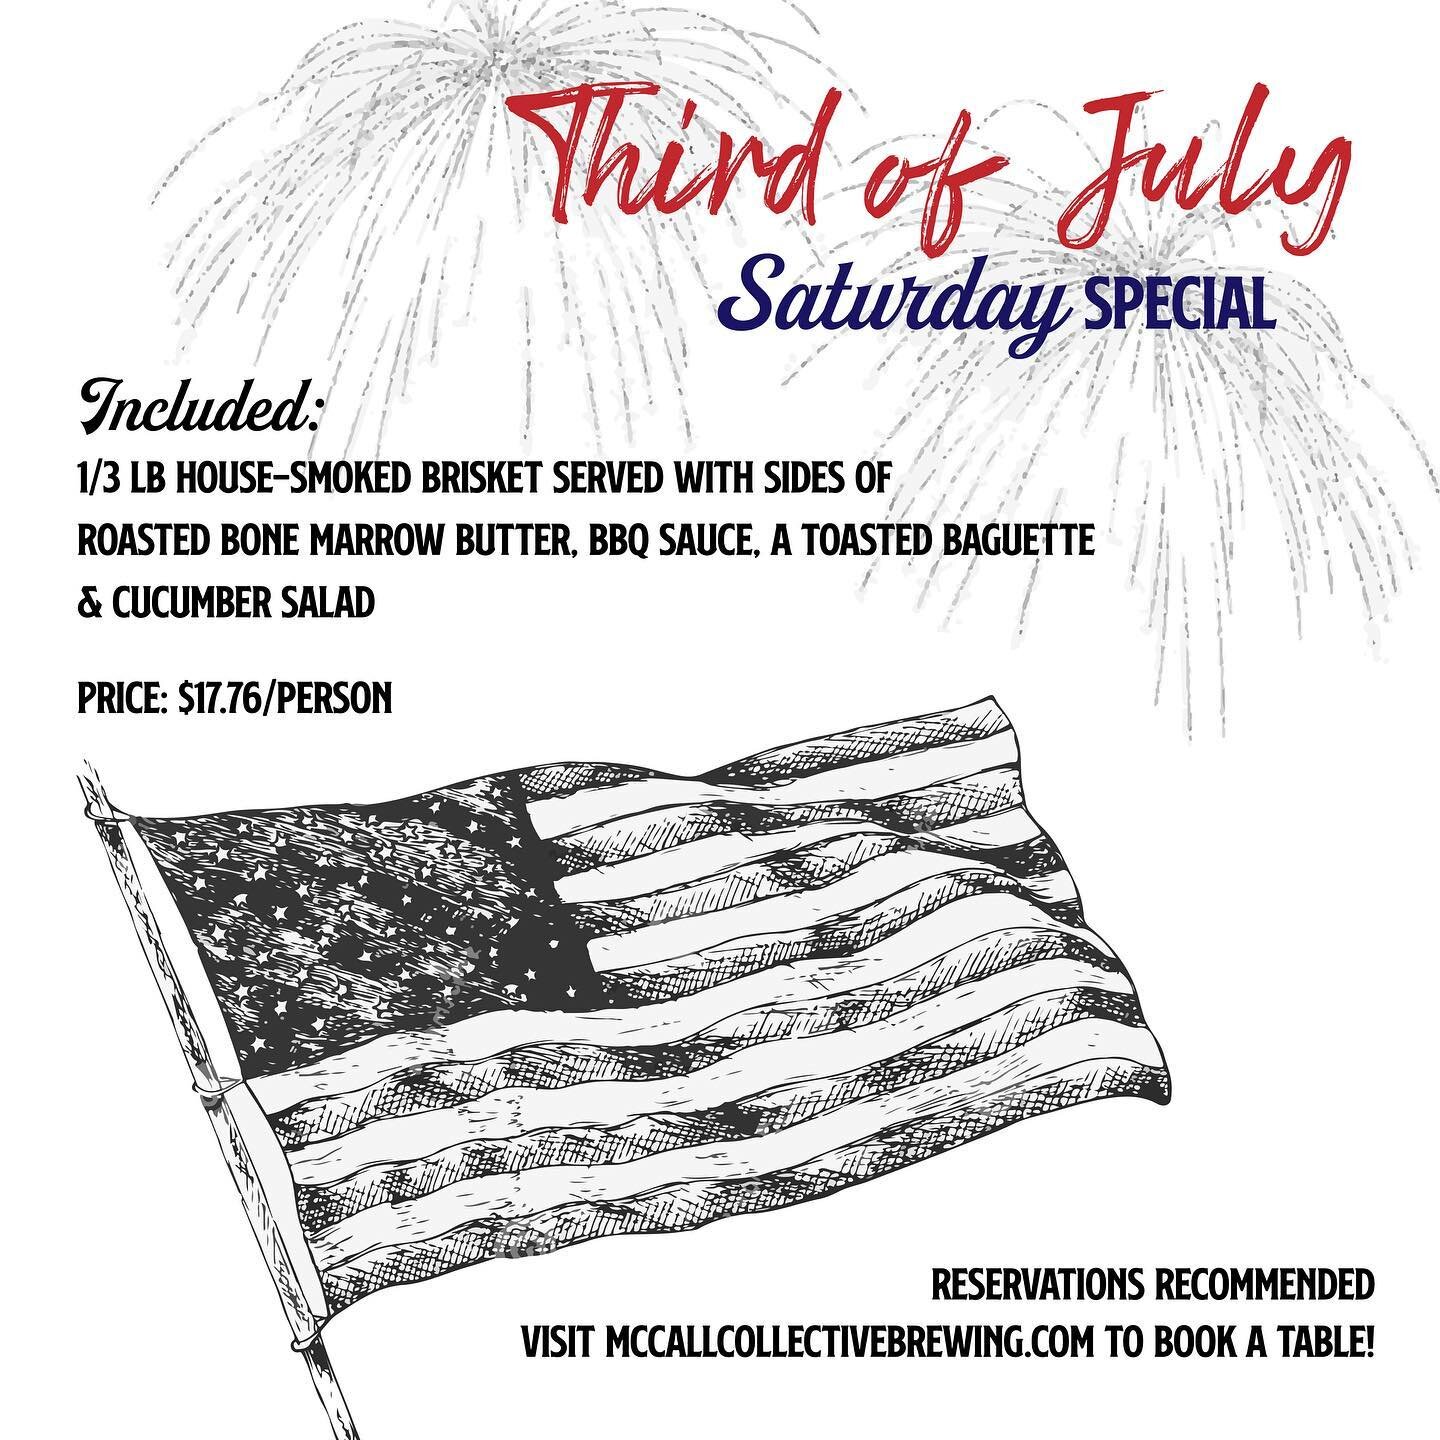 4th of July Weekend SPECIAL! Saturday July 3rd 🇺🇸

1/3 LB House-Smoked Brisket Served with sides of Roasted Bone Marrow Butter, BBG Sauce, a Toasted Baguette, and Cucumber Salad.

$17.76 per person 🇺🇸

Reservations Encouraged but NOT REQUIRED
via